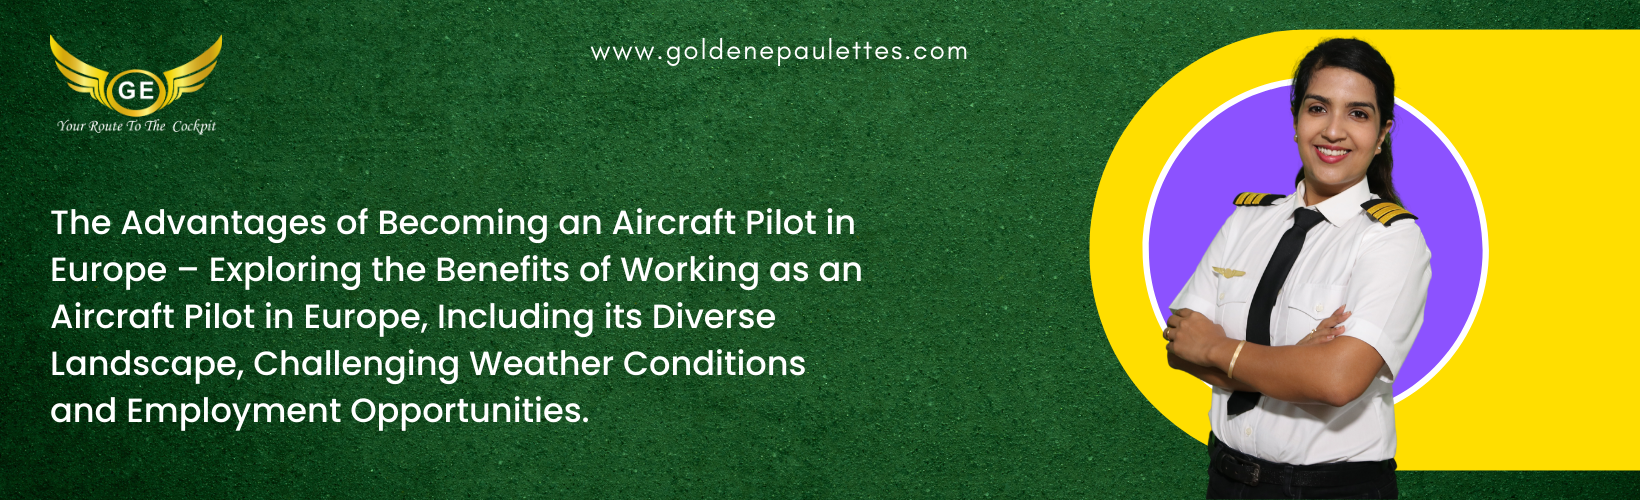 The Benefits of Becoming an Aircraft Pilot in Europe – A look at the advantages of becoming an aircraft pilot in Europe, such as the diverse landscape, challenging weather conditions and the opportunity to work for a variety of companies. (Reference